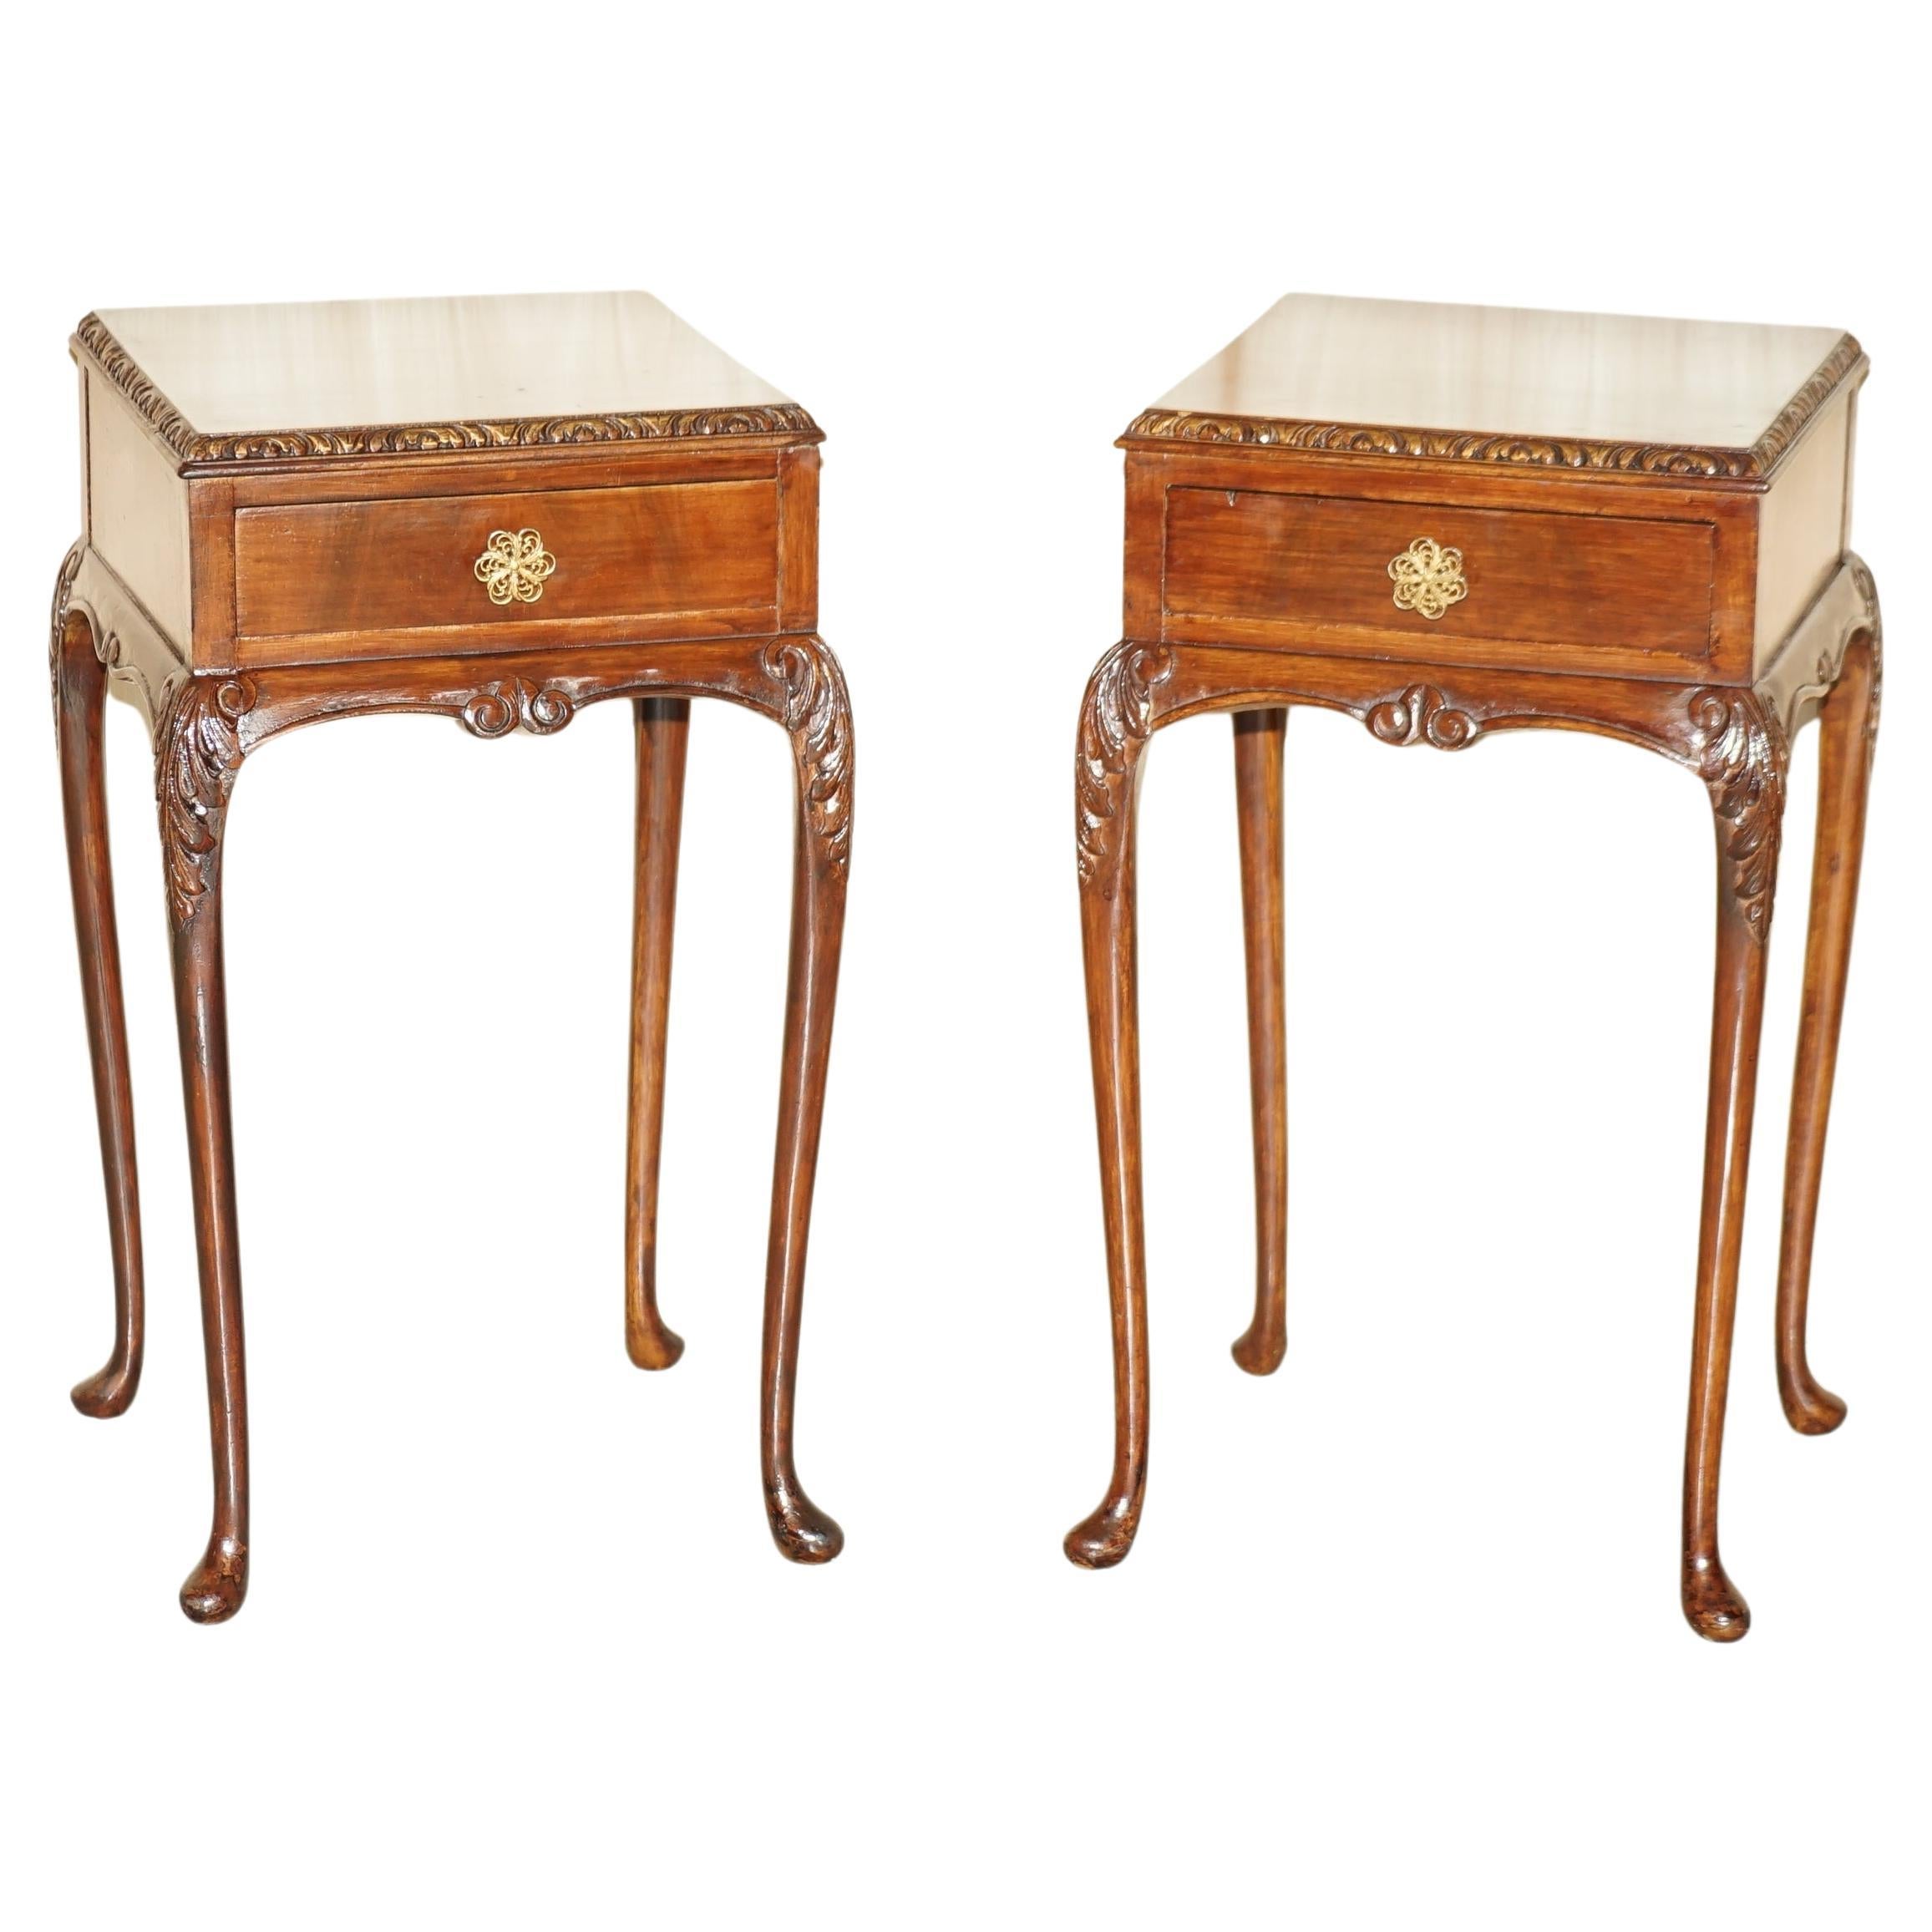 PAIR OF ANTIQUE VICTORIAN ELEGANT CABRIOLE LEGGED SINGLE DRAWER TALL SiDE TABLES For Sale